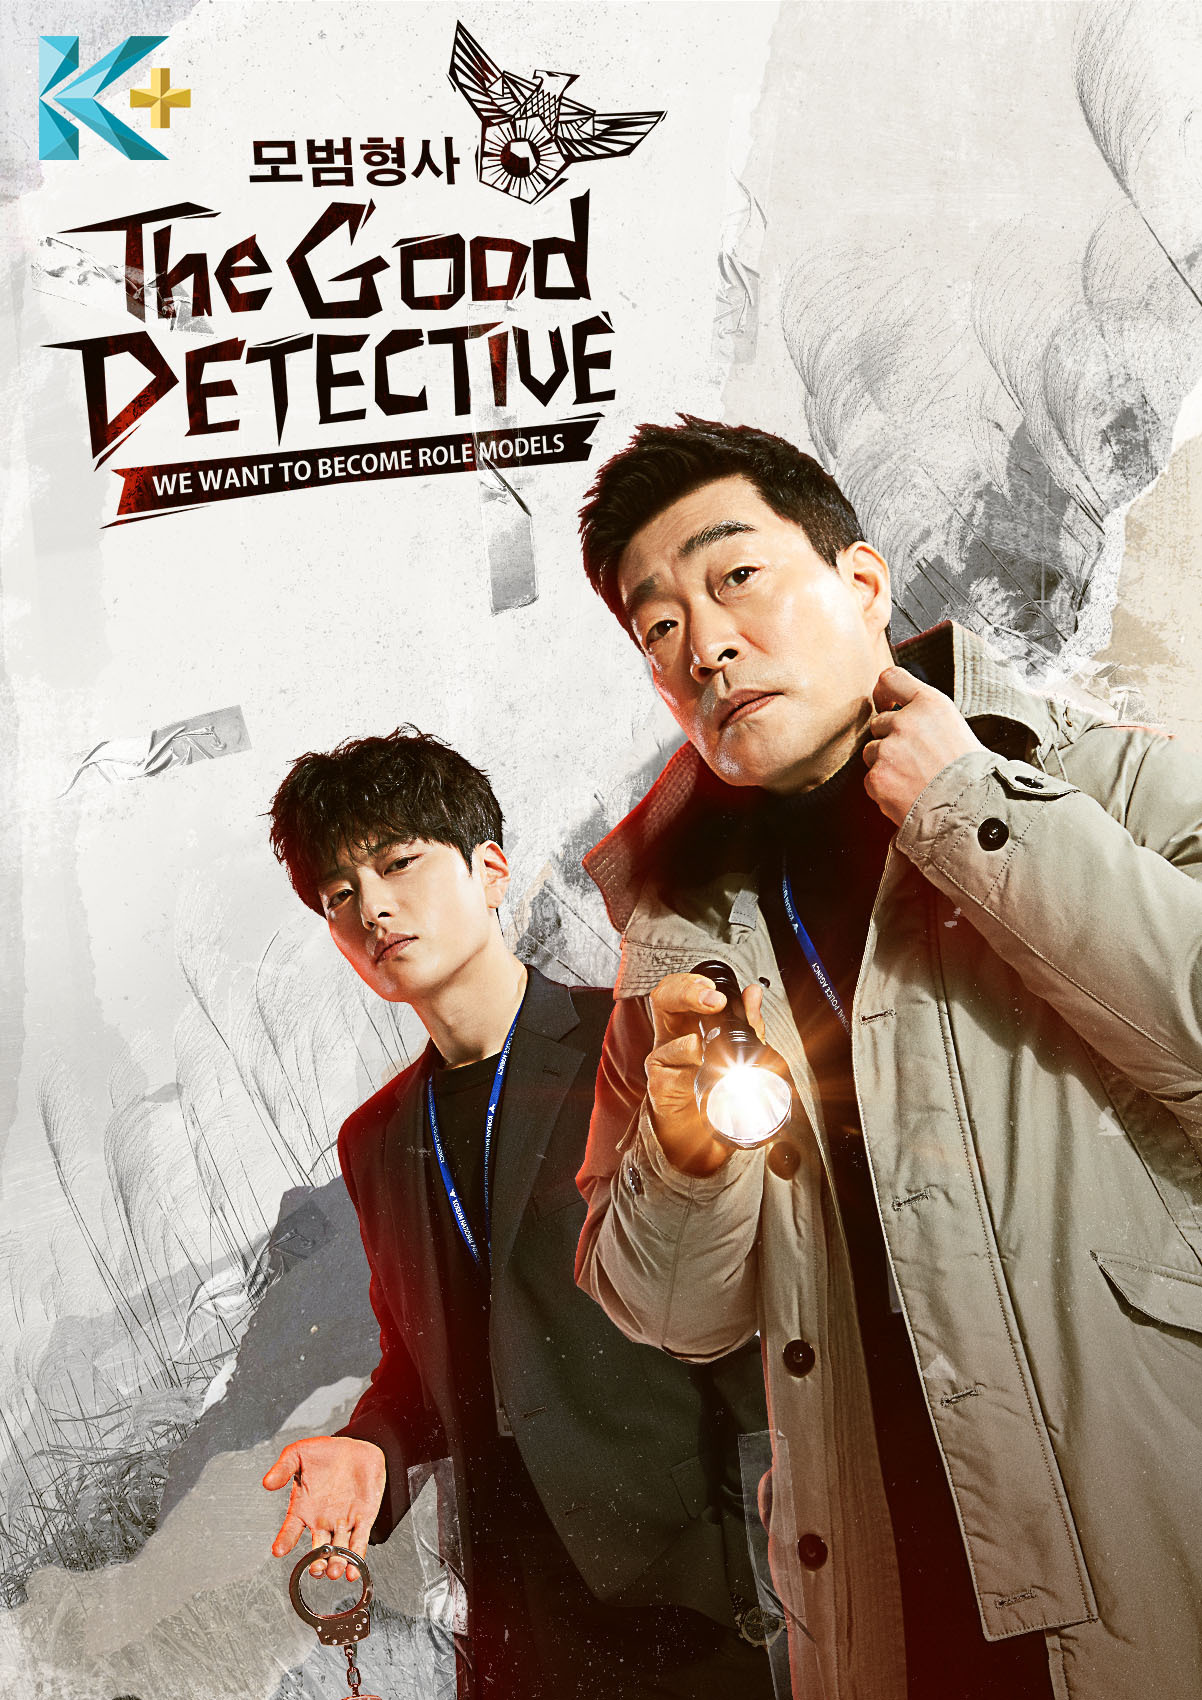 MALAYSIAN KPOP FANS — The Good Detective